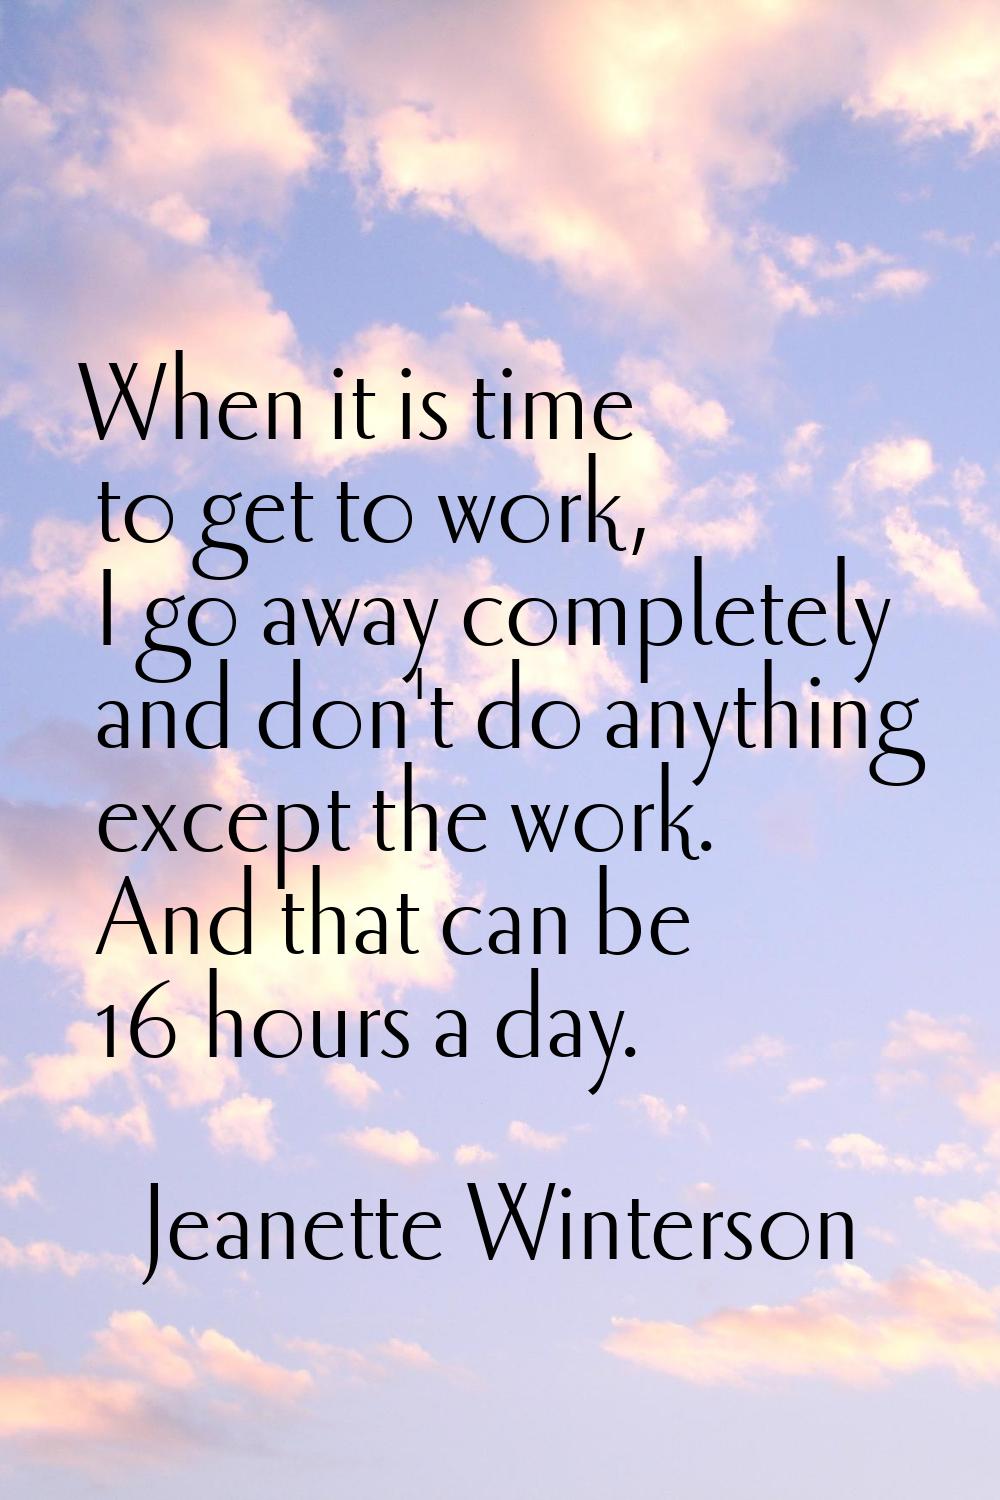 When it is time to get to work, I go away completely and don't do anything except the work. And tha